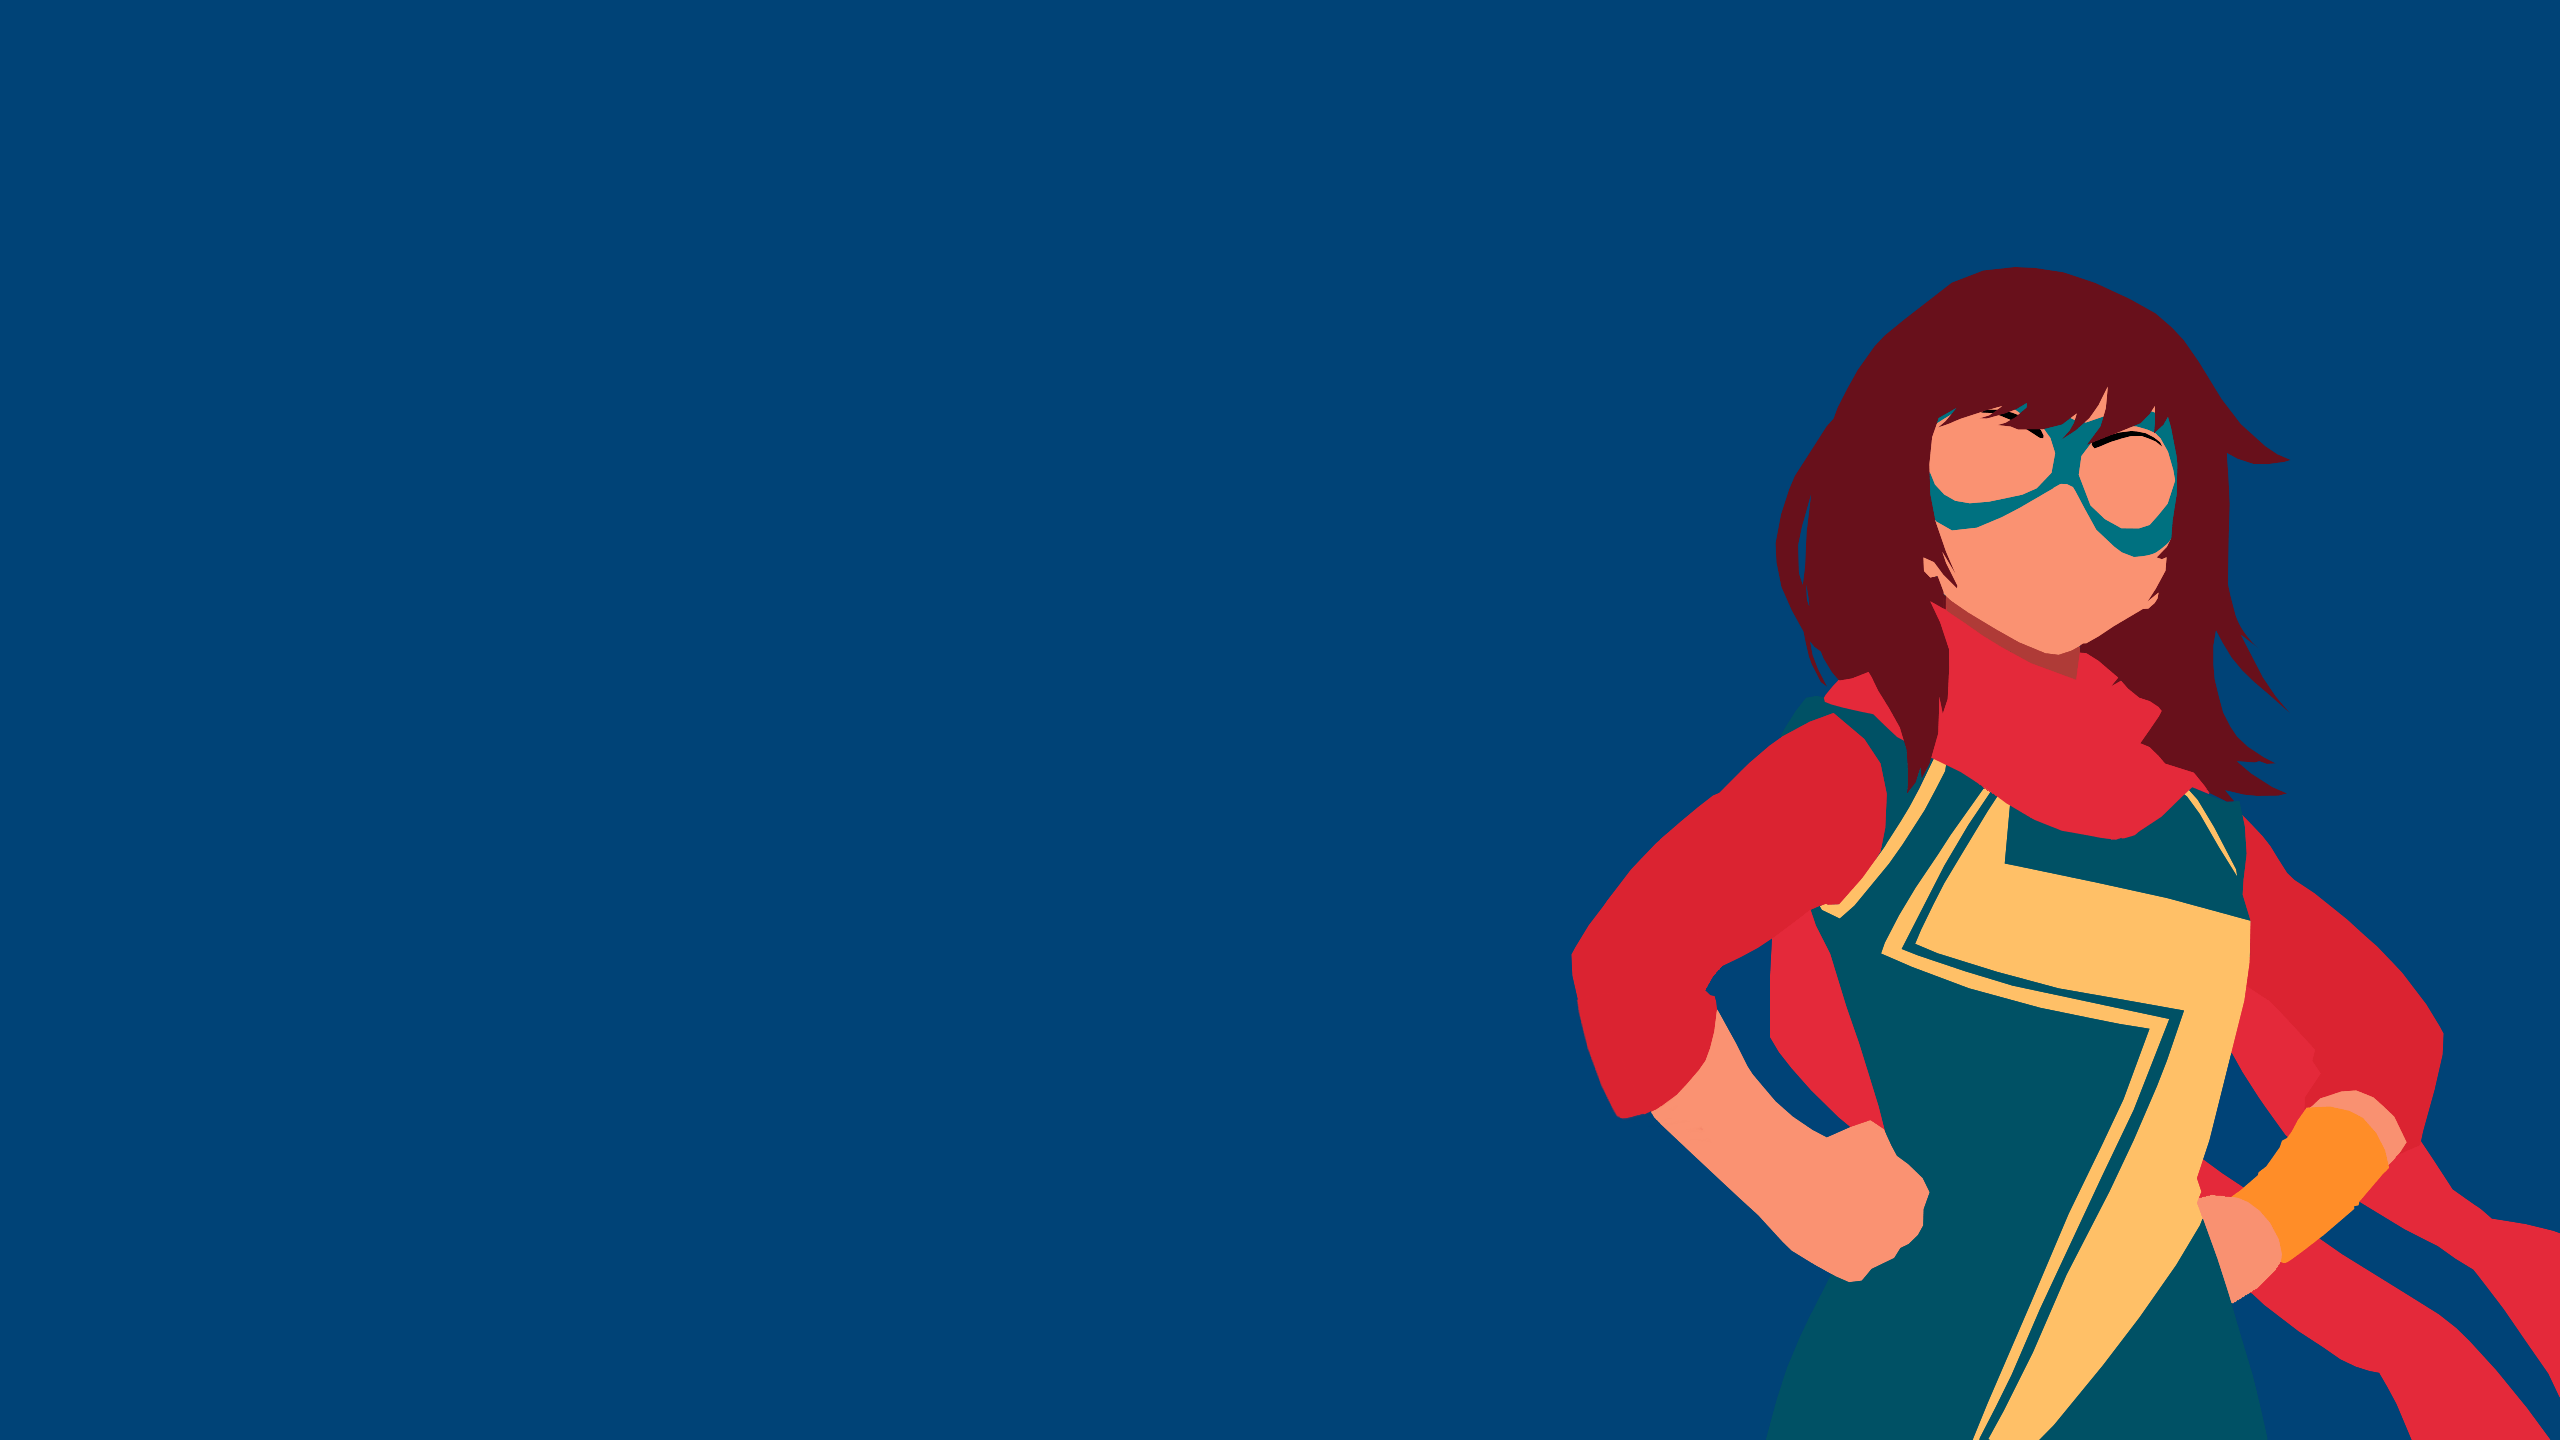 Made a minimalist style Ms. Marvel wallpapers since I couldn